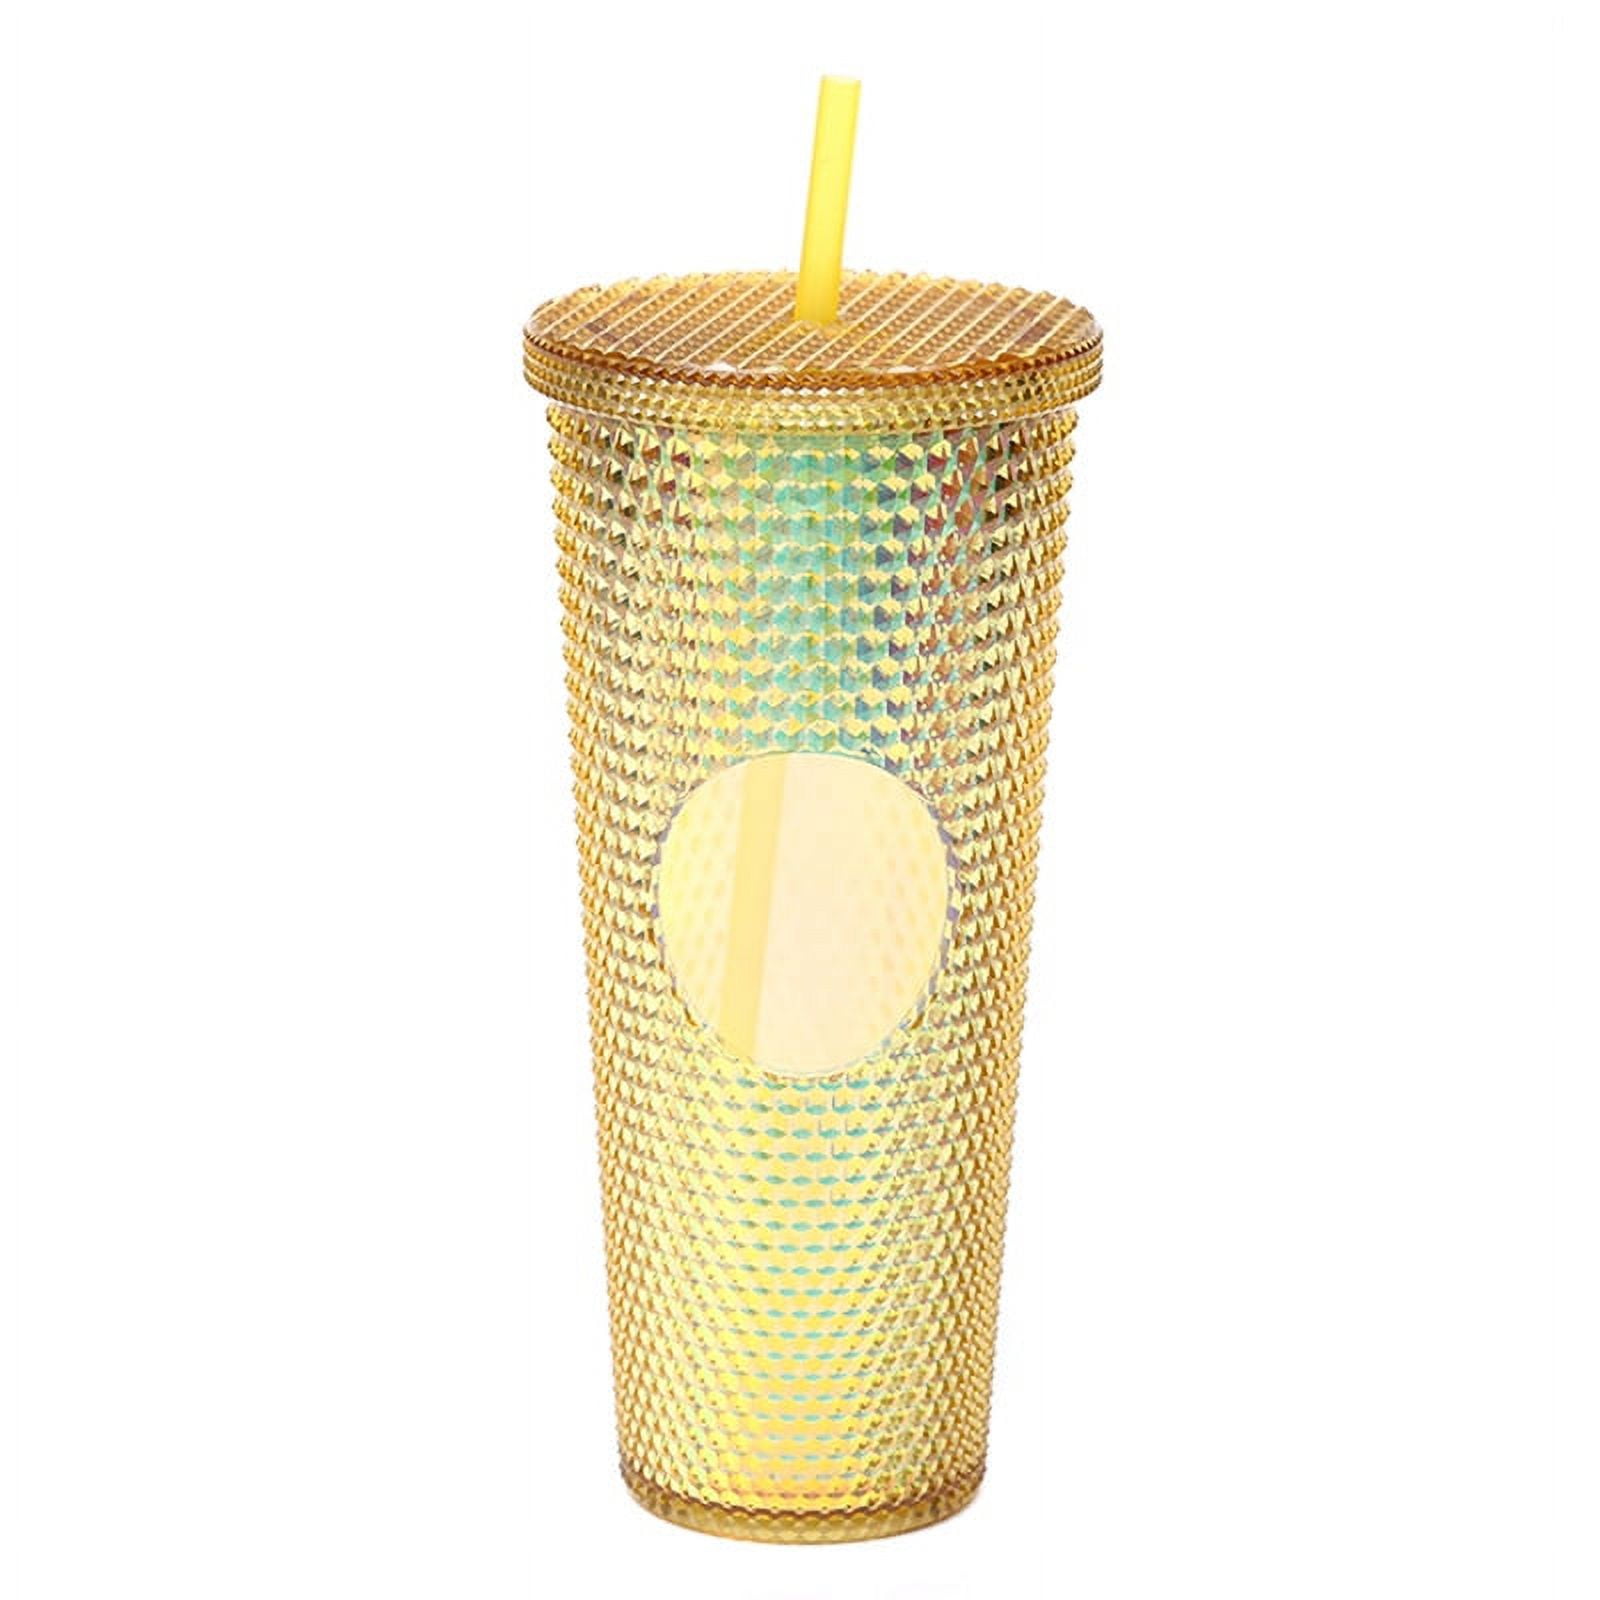 Kensal Home Reusable Iced Coffee Cup (24 Oz/Venti), Leak Proof and Double Wall Insulated Iced Coffee Tumbler, Come with Reusable Plastic